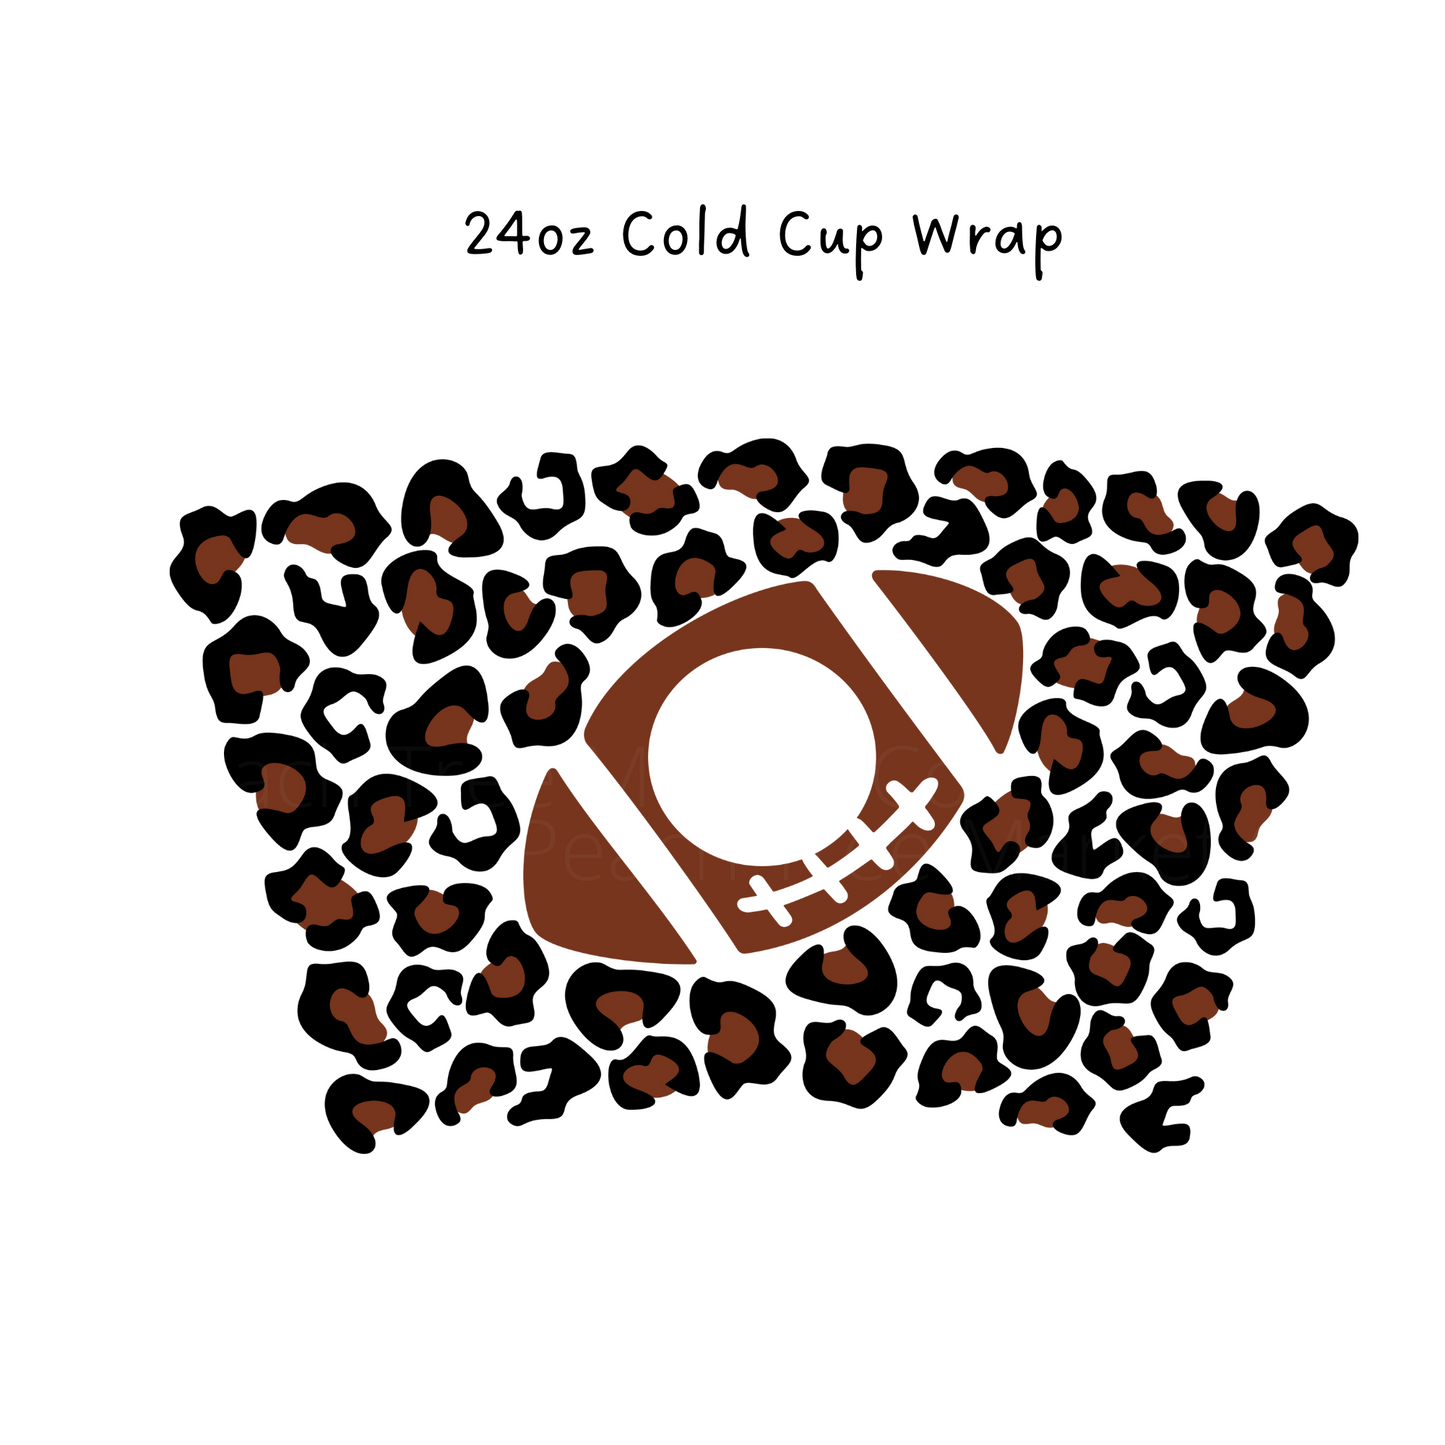 Leopard Football 24oz Cold Cup Wrap